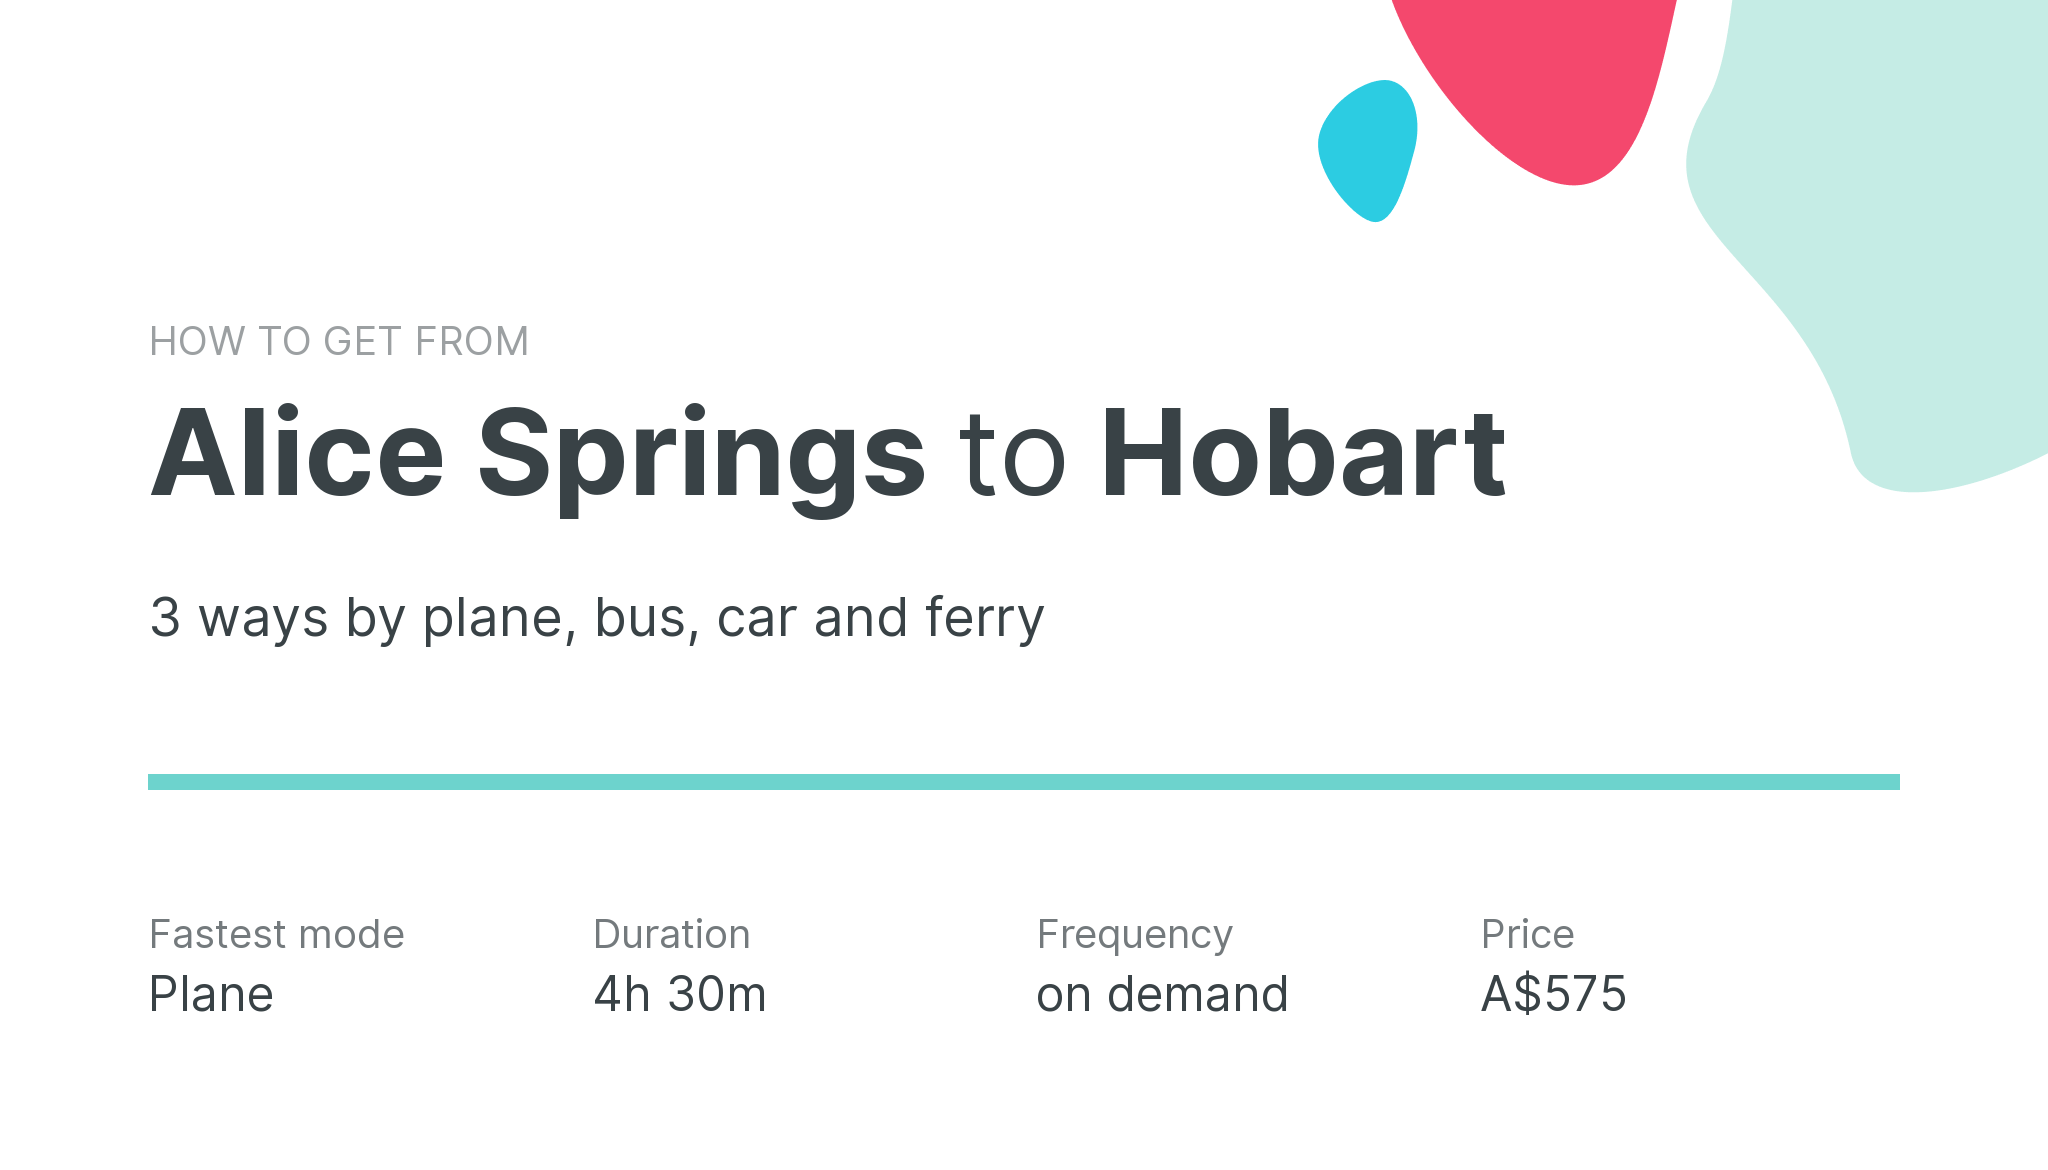 How do I get from Alice Springs to Hobart